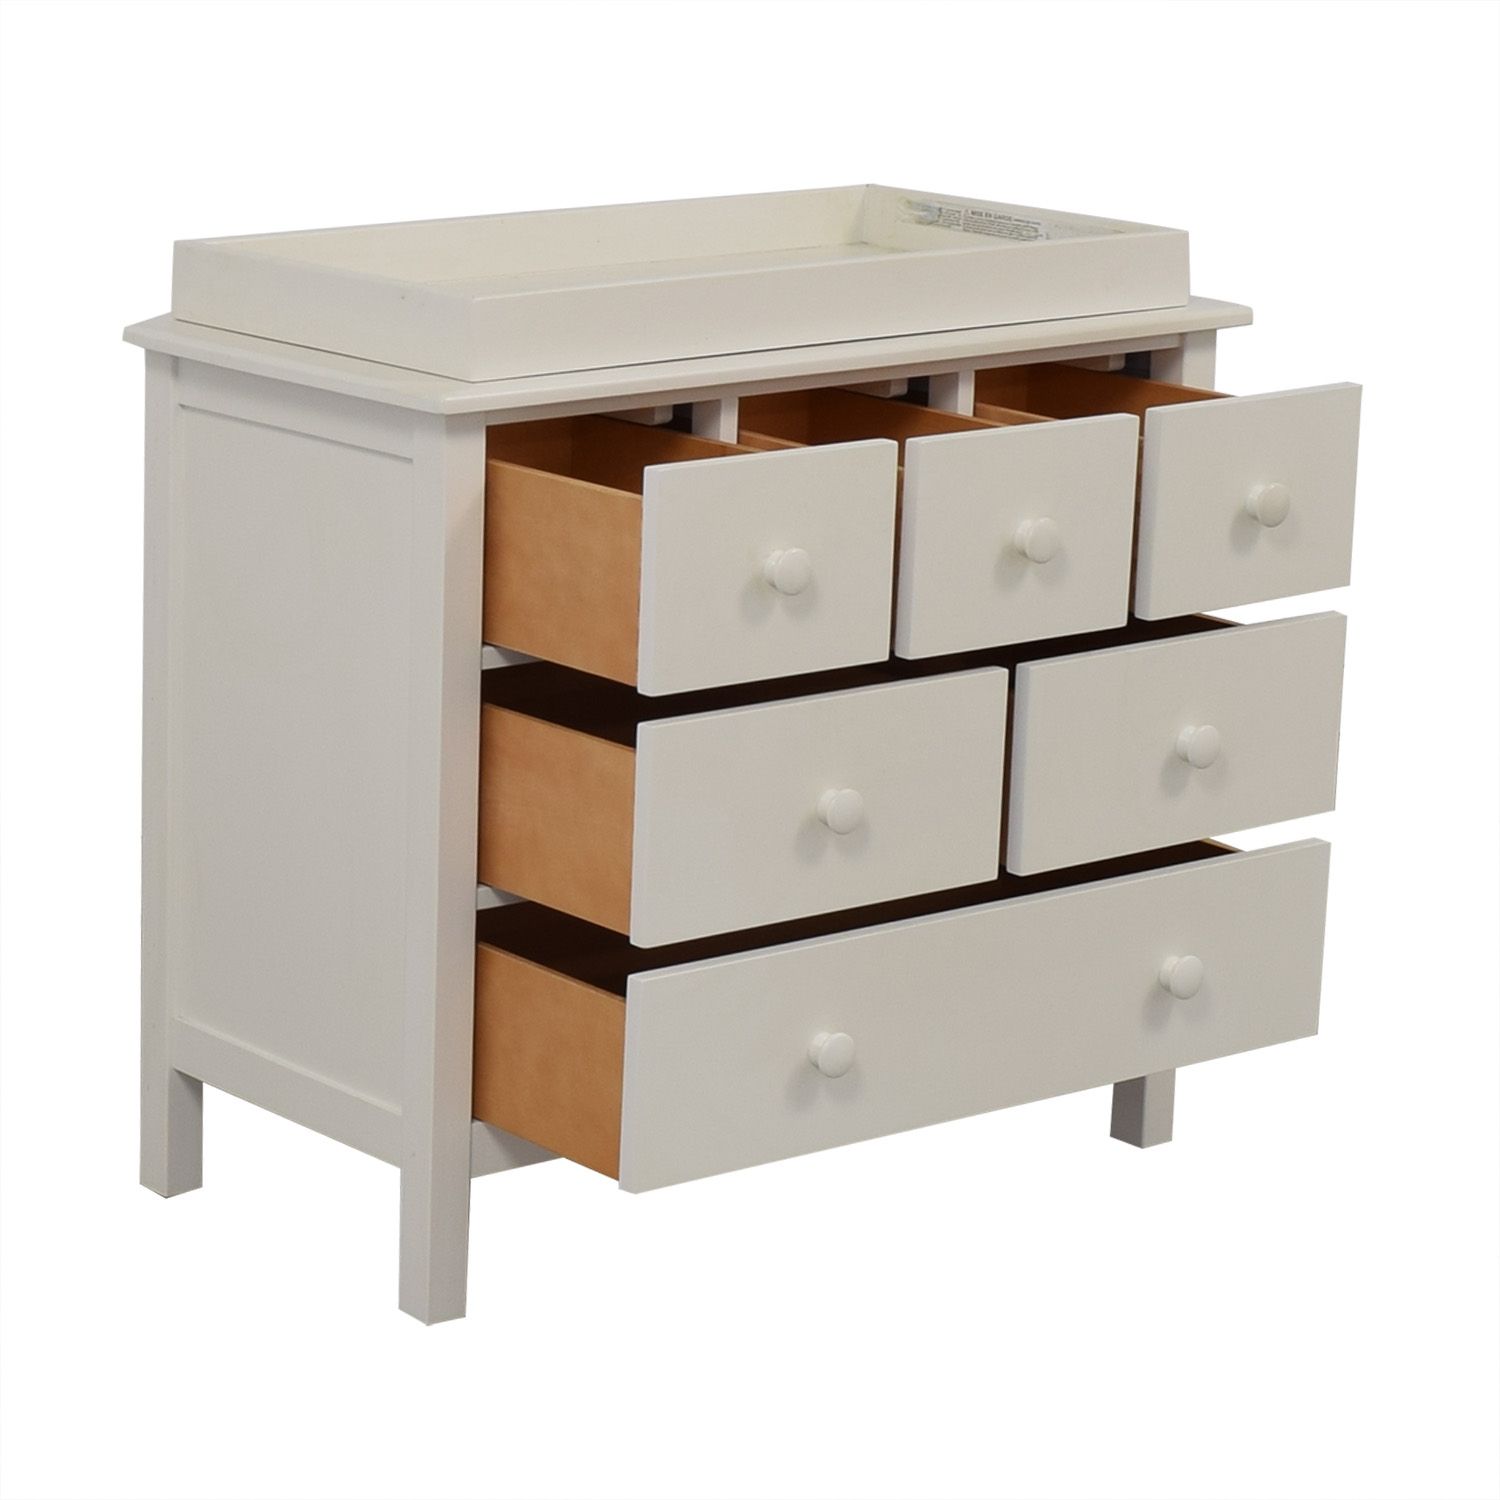 72% Off – Pottery Barn Kids Pottery Barn Kids Kendall Dresser And Changing  Table / Storage Inside Kendall Sideboards (View 28 of 30)